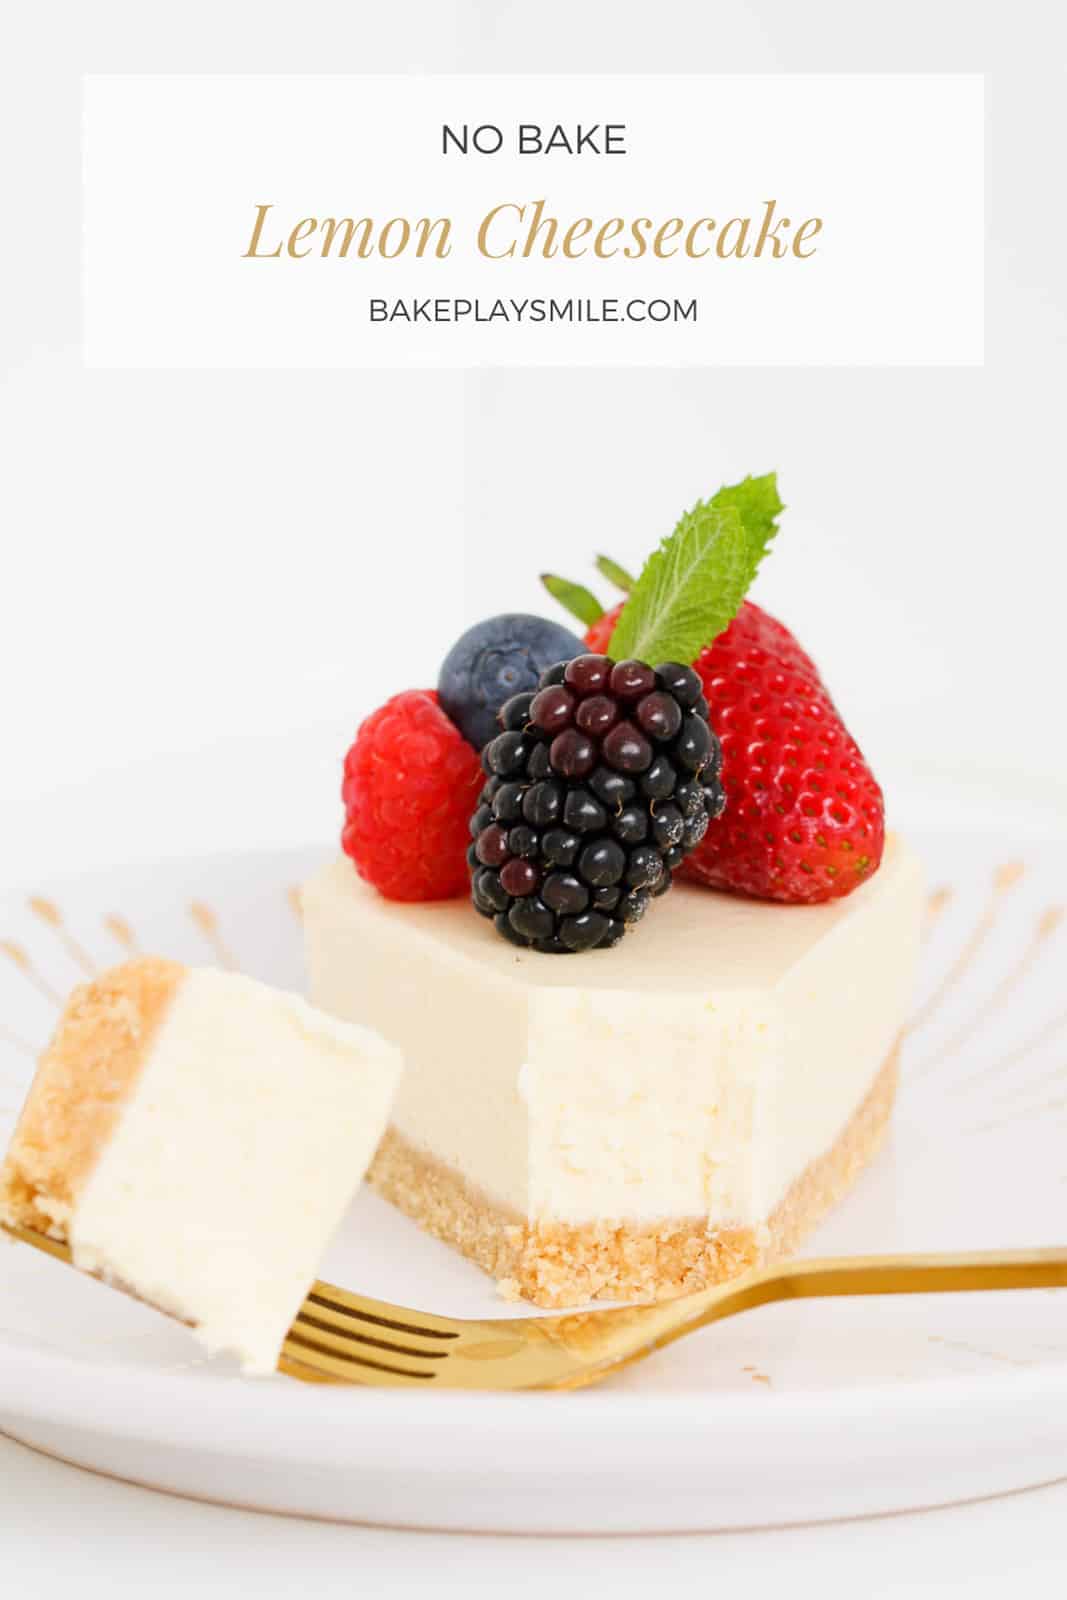 A Pinterest image of a piece of lemon cheesecake.